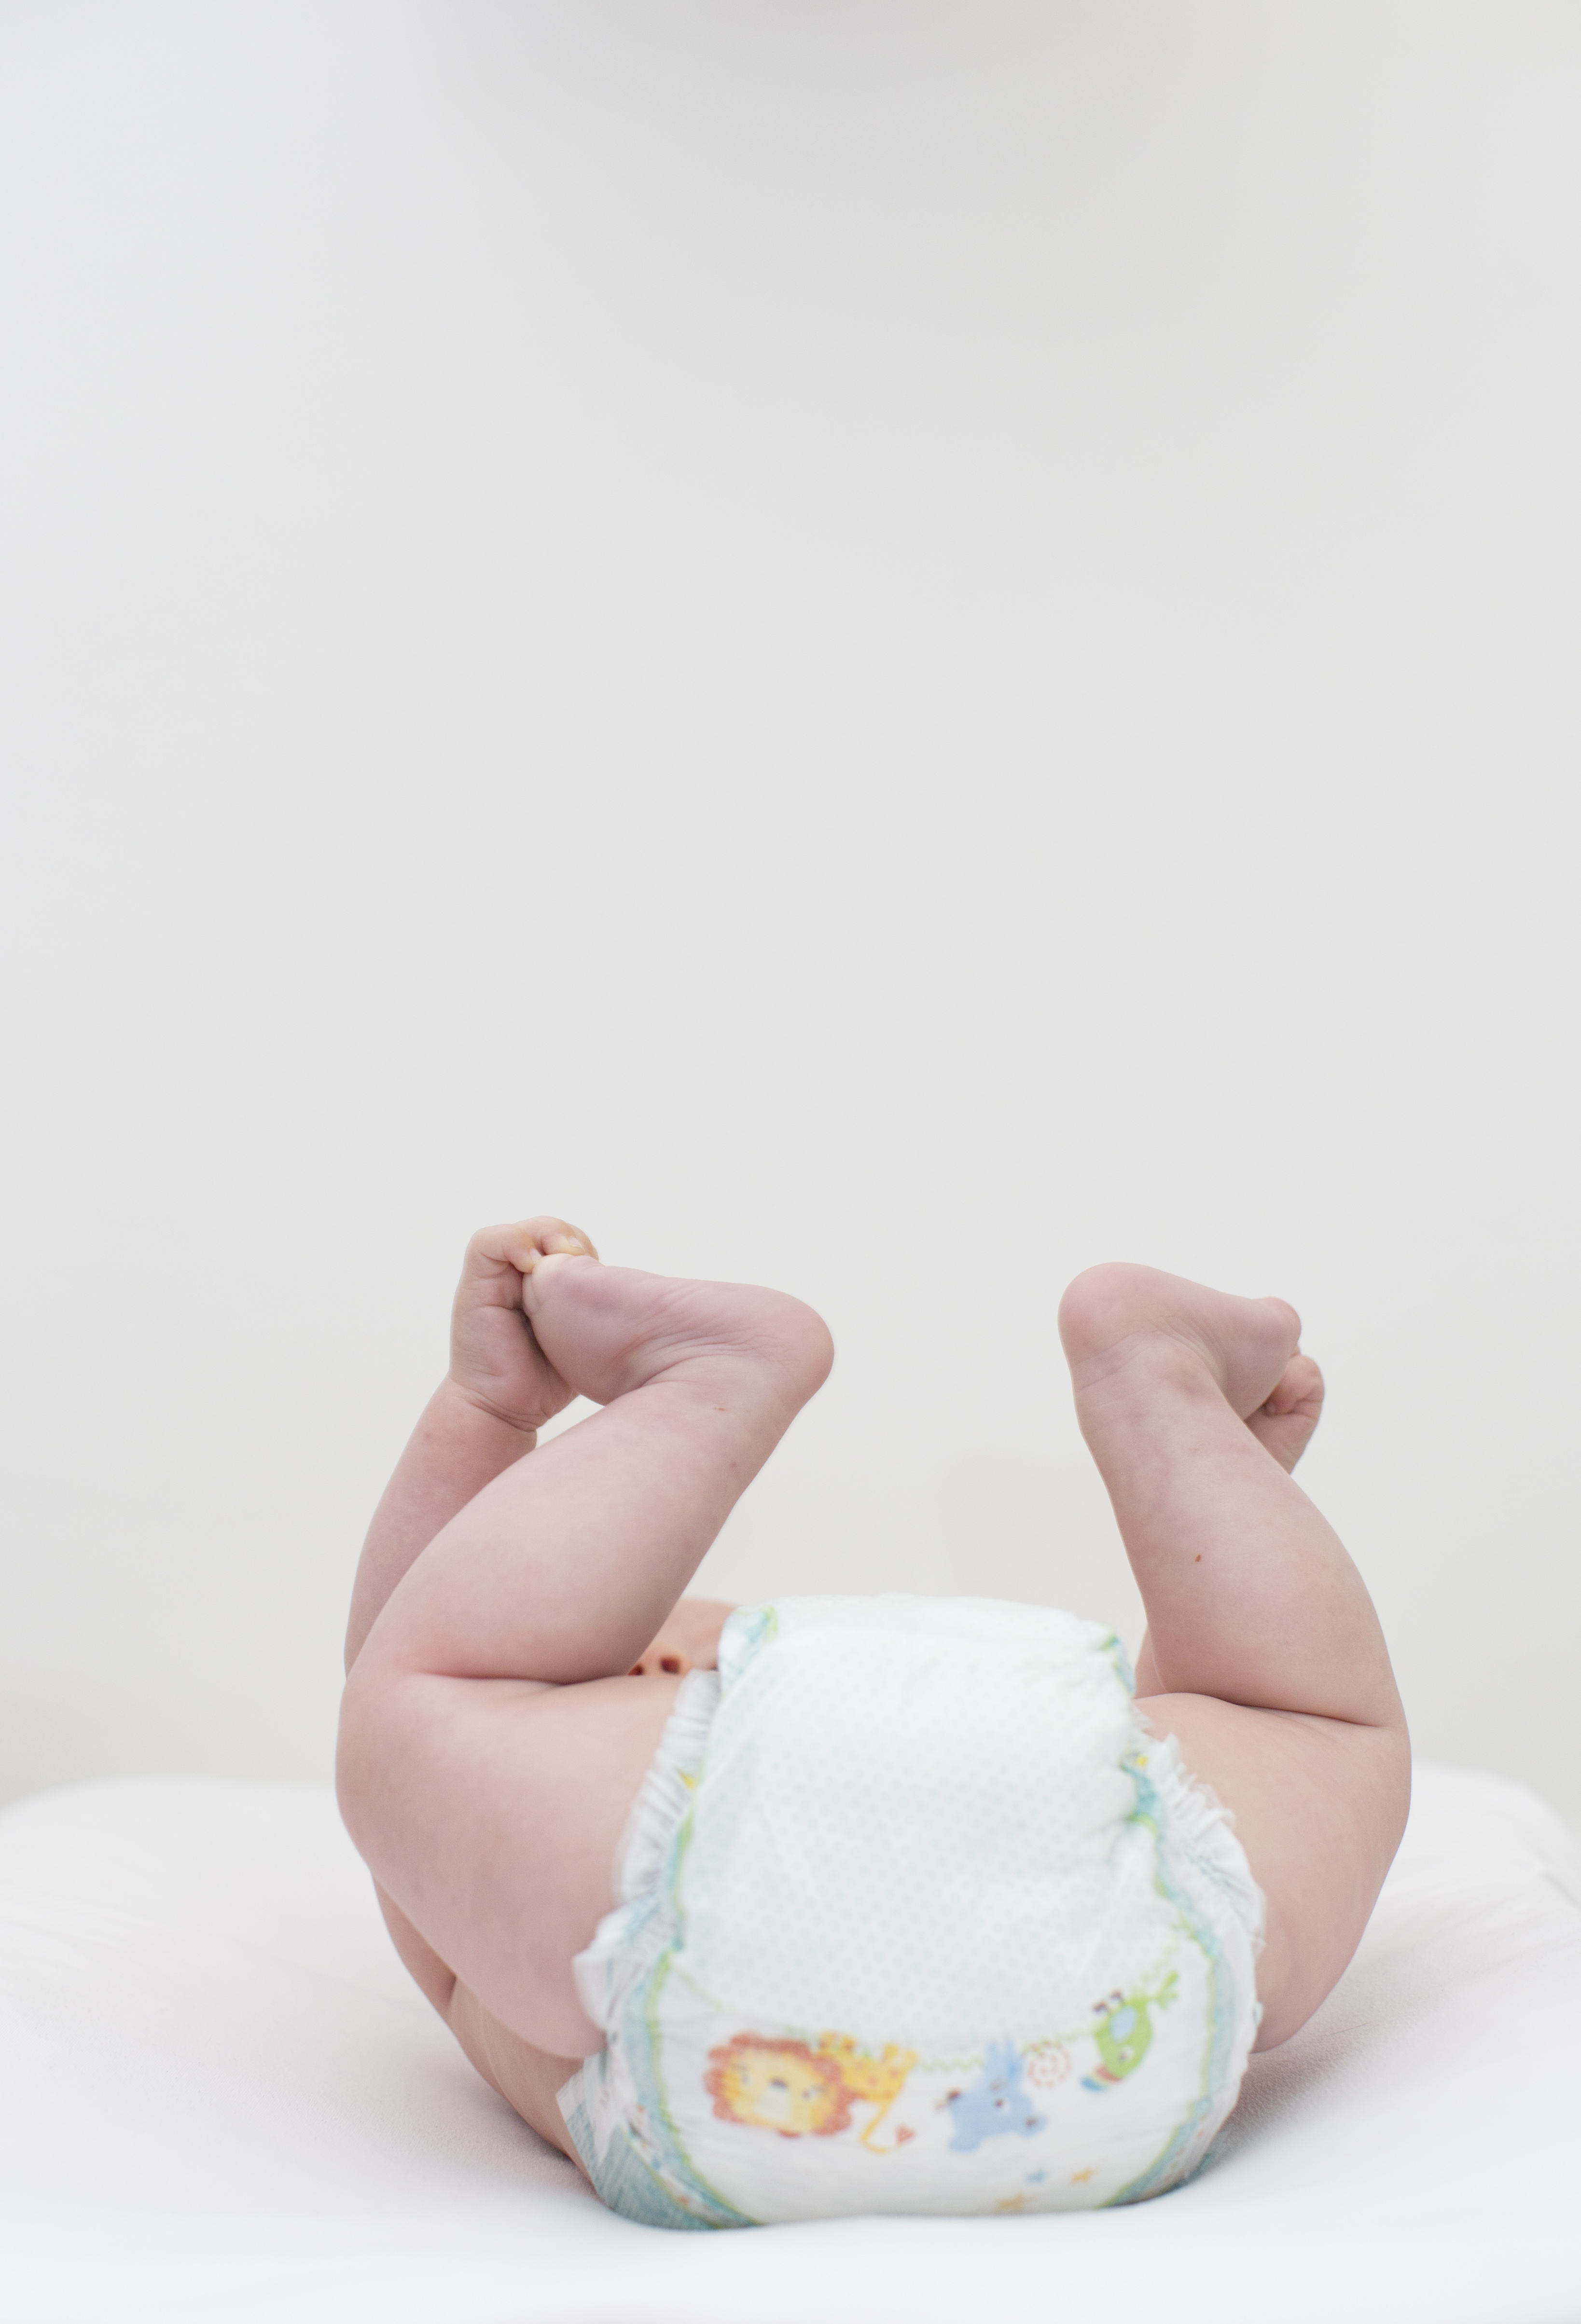 Smart diaper" by Alphabet’s Verily would skip sniff test to answer: #1...